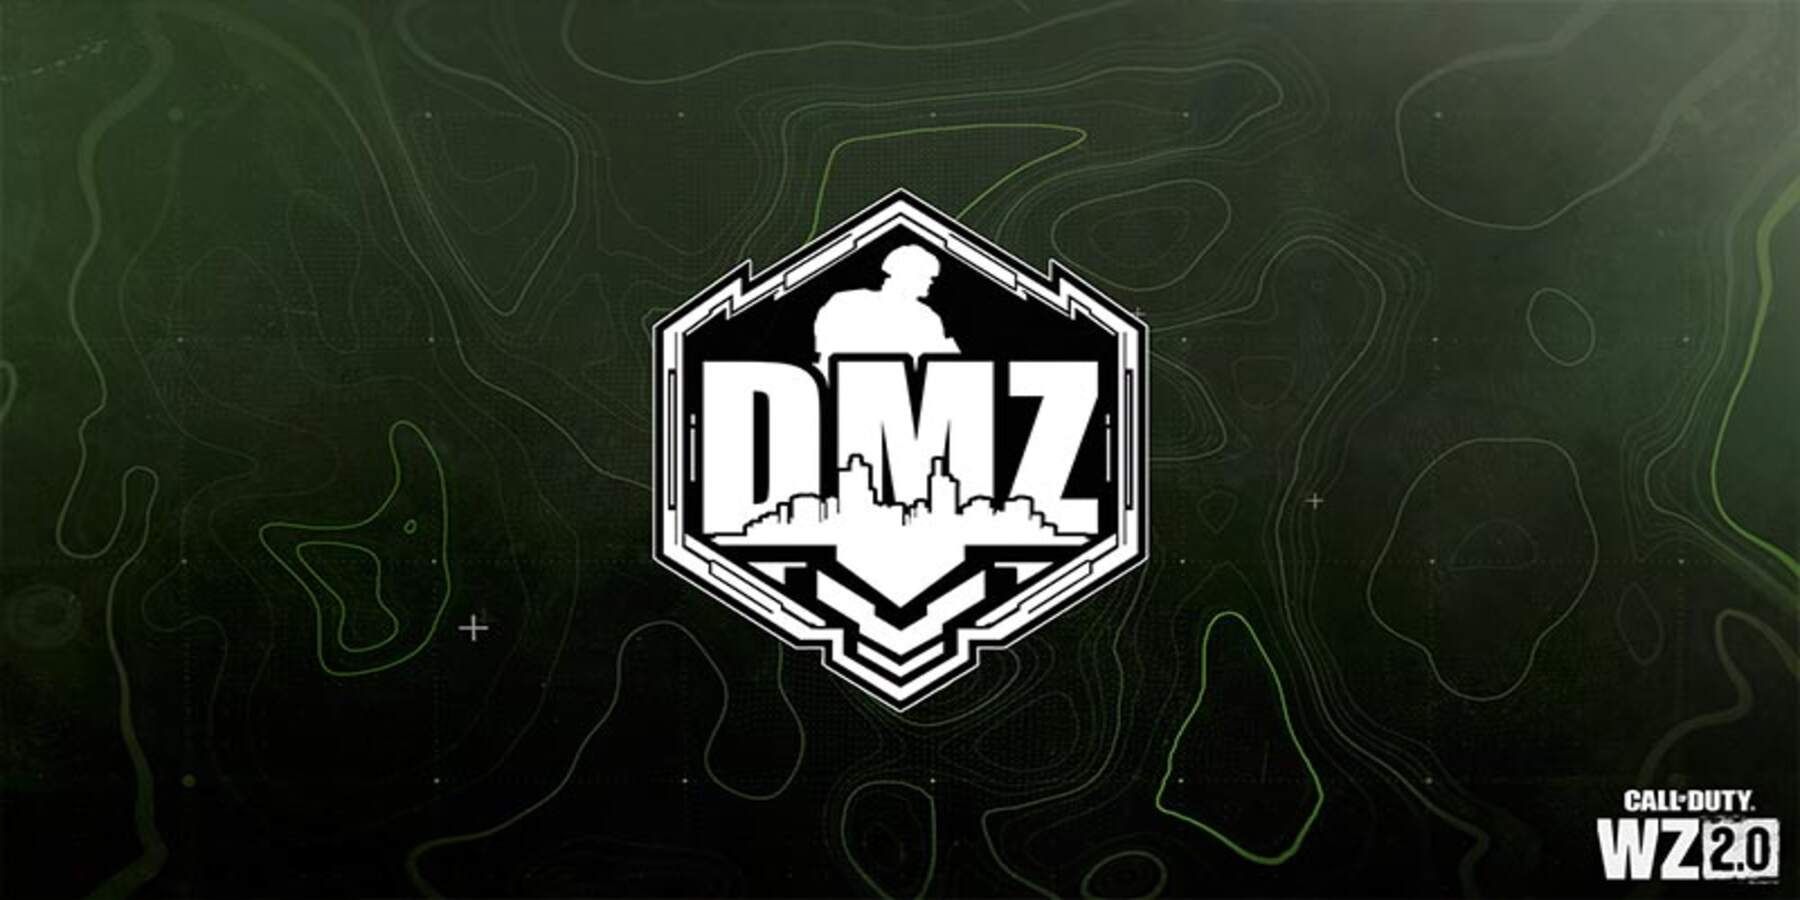 The Next Call of Duty: Black Ops Game Has To Continue
Supporting DMZ